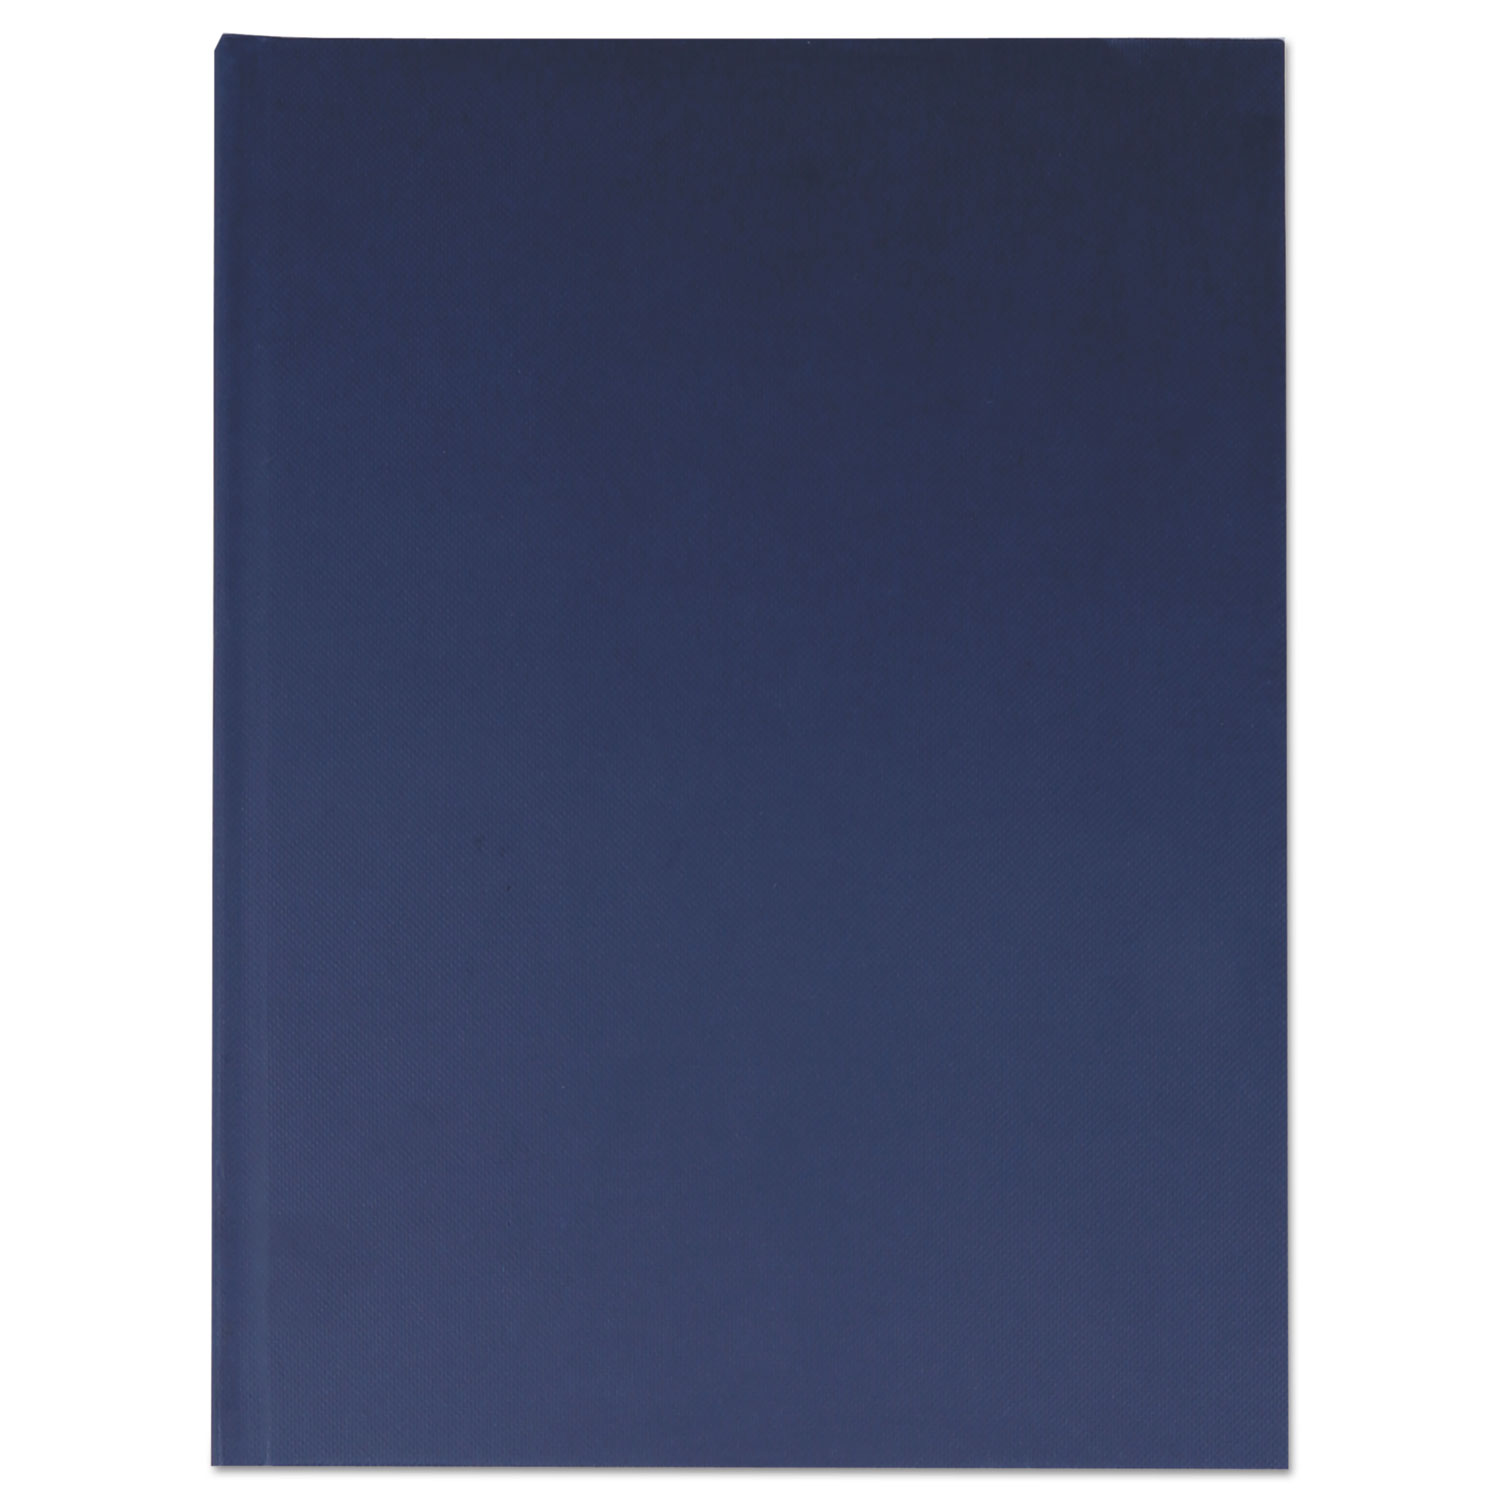  Universal UNV66352 Casebound Hardcover Notebook, Wide/Legal Rule, Dark Blue, 10.25 x 7.68, 150 Sheets (UNV66352) 